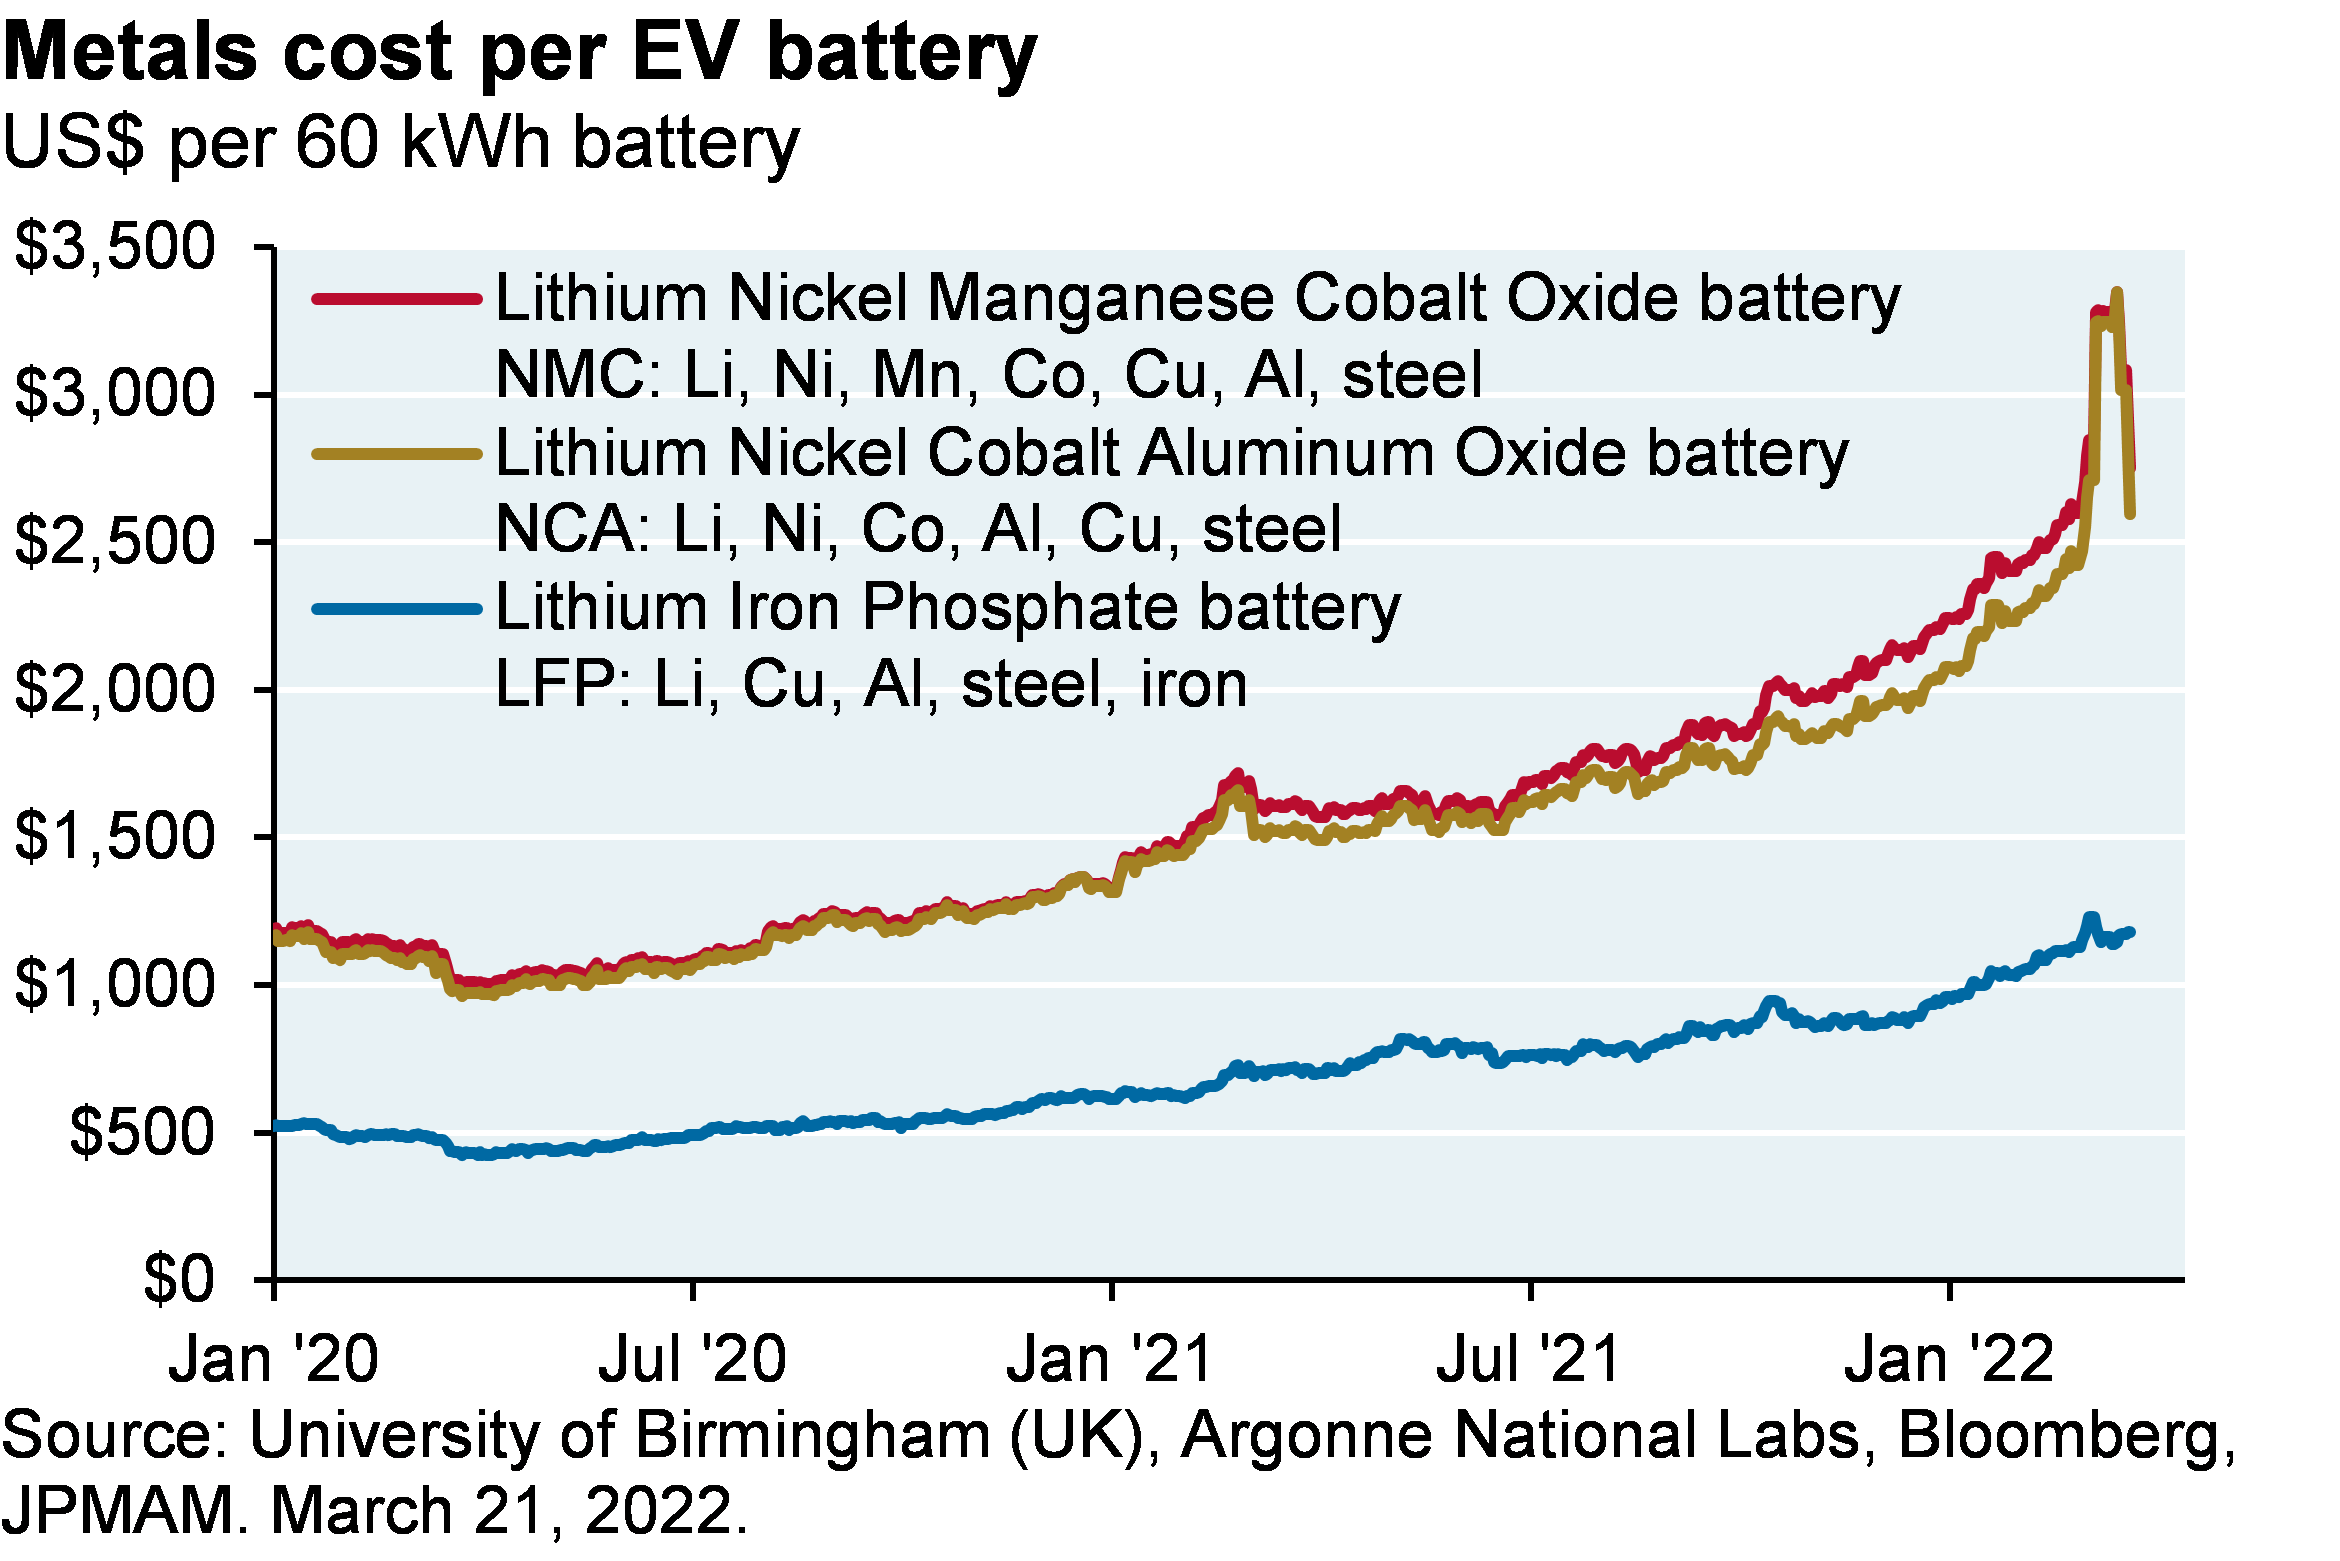 Line chart shows the cost of metals per $60 kWh electric vehicle battery. Metal costs for NMC and NCA batteries have risen from around $1,000 per battery in January of 2020 to between $3,000 and $3,500 in 2022. Metal costs for LFP batteries have risen from around $500 to just above $1,000 per battery.